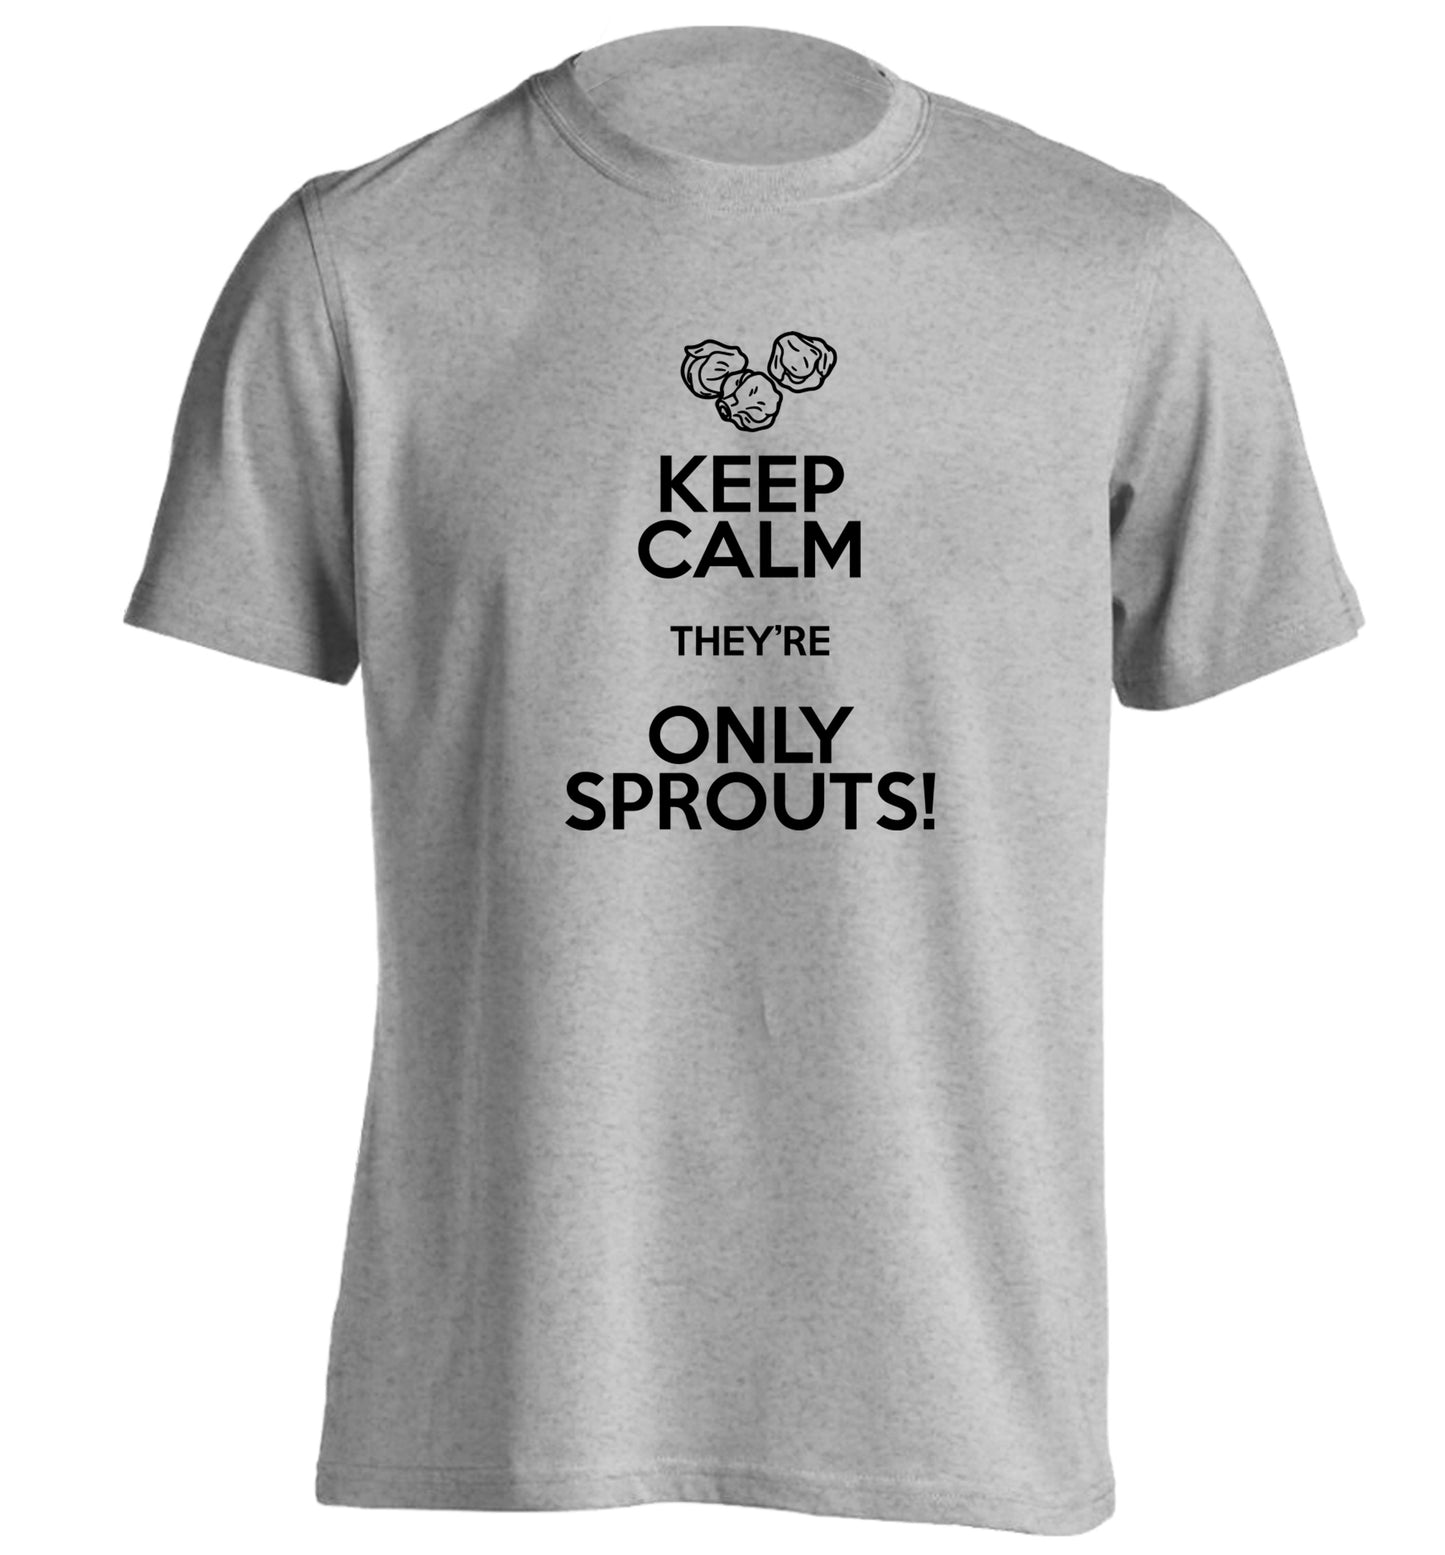 Keep calm they're only sprouts adults unisex grey Tshirt 2XL